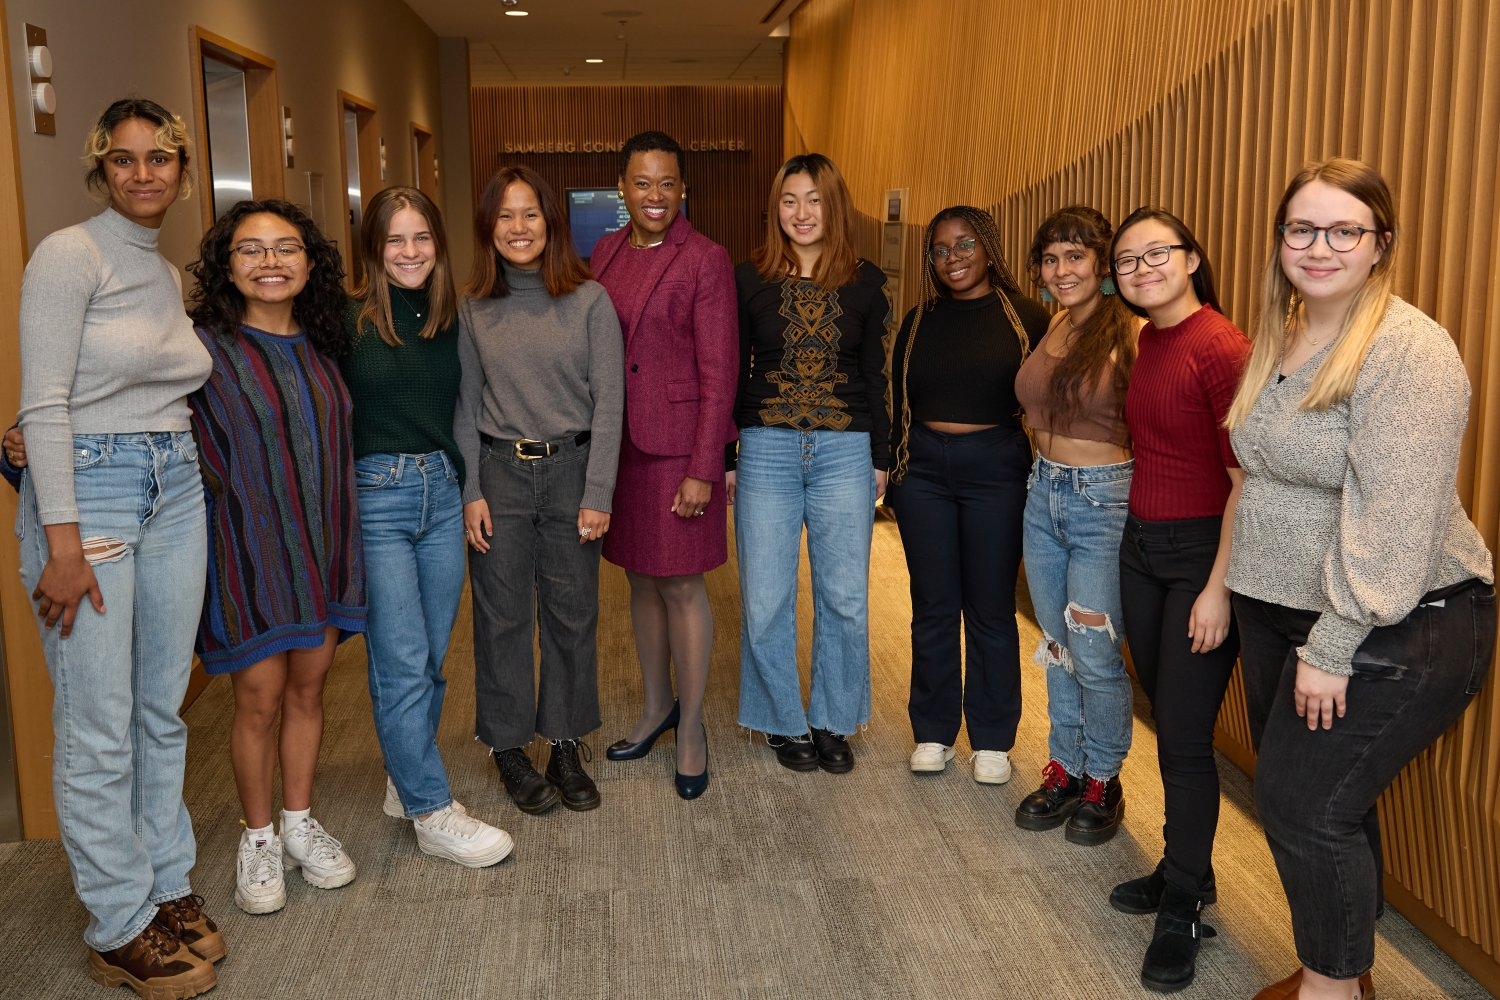 2023 Change-Maker honorees for Outstanding Student Group — the MIT Monologues (MITMo) — with Chancellor Melissa Nobles (center).